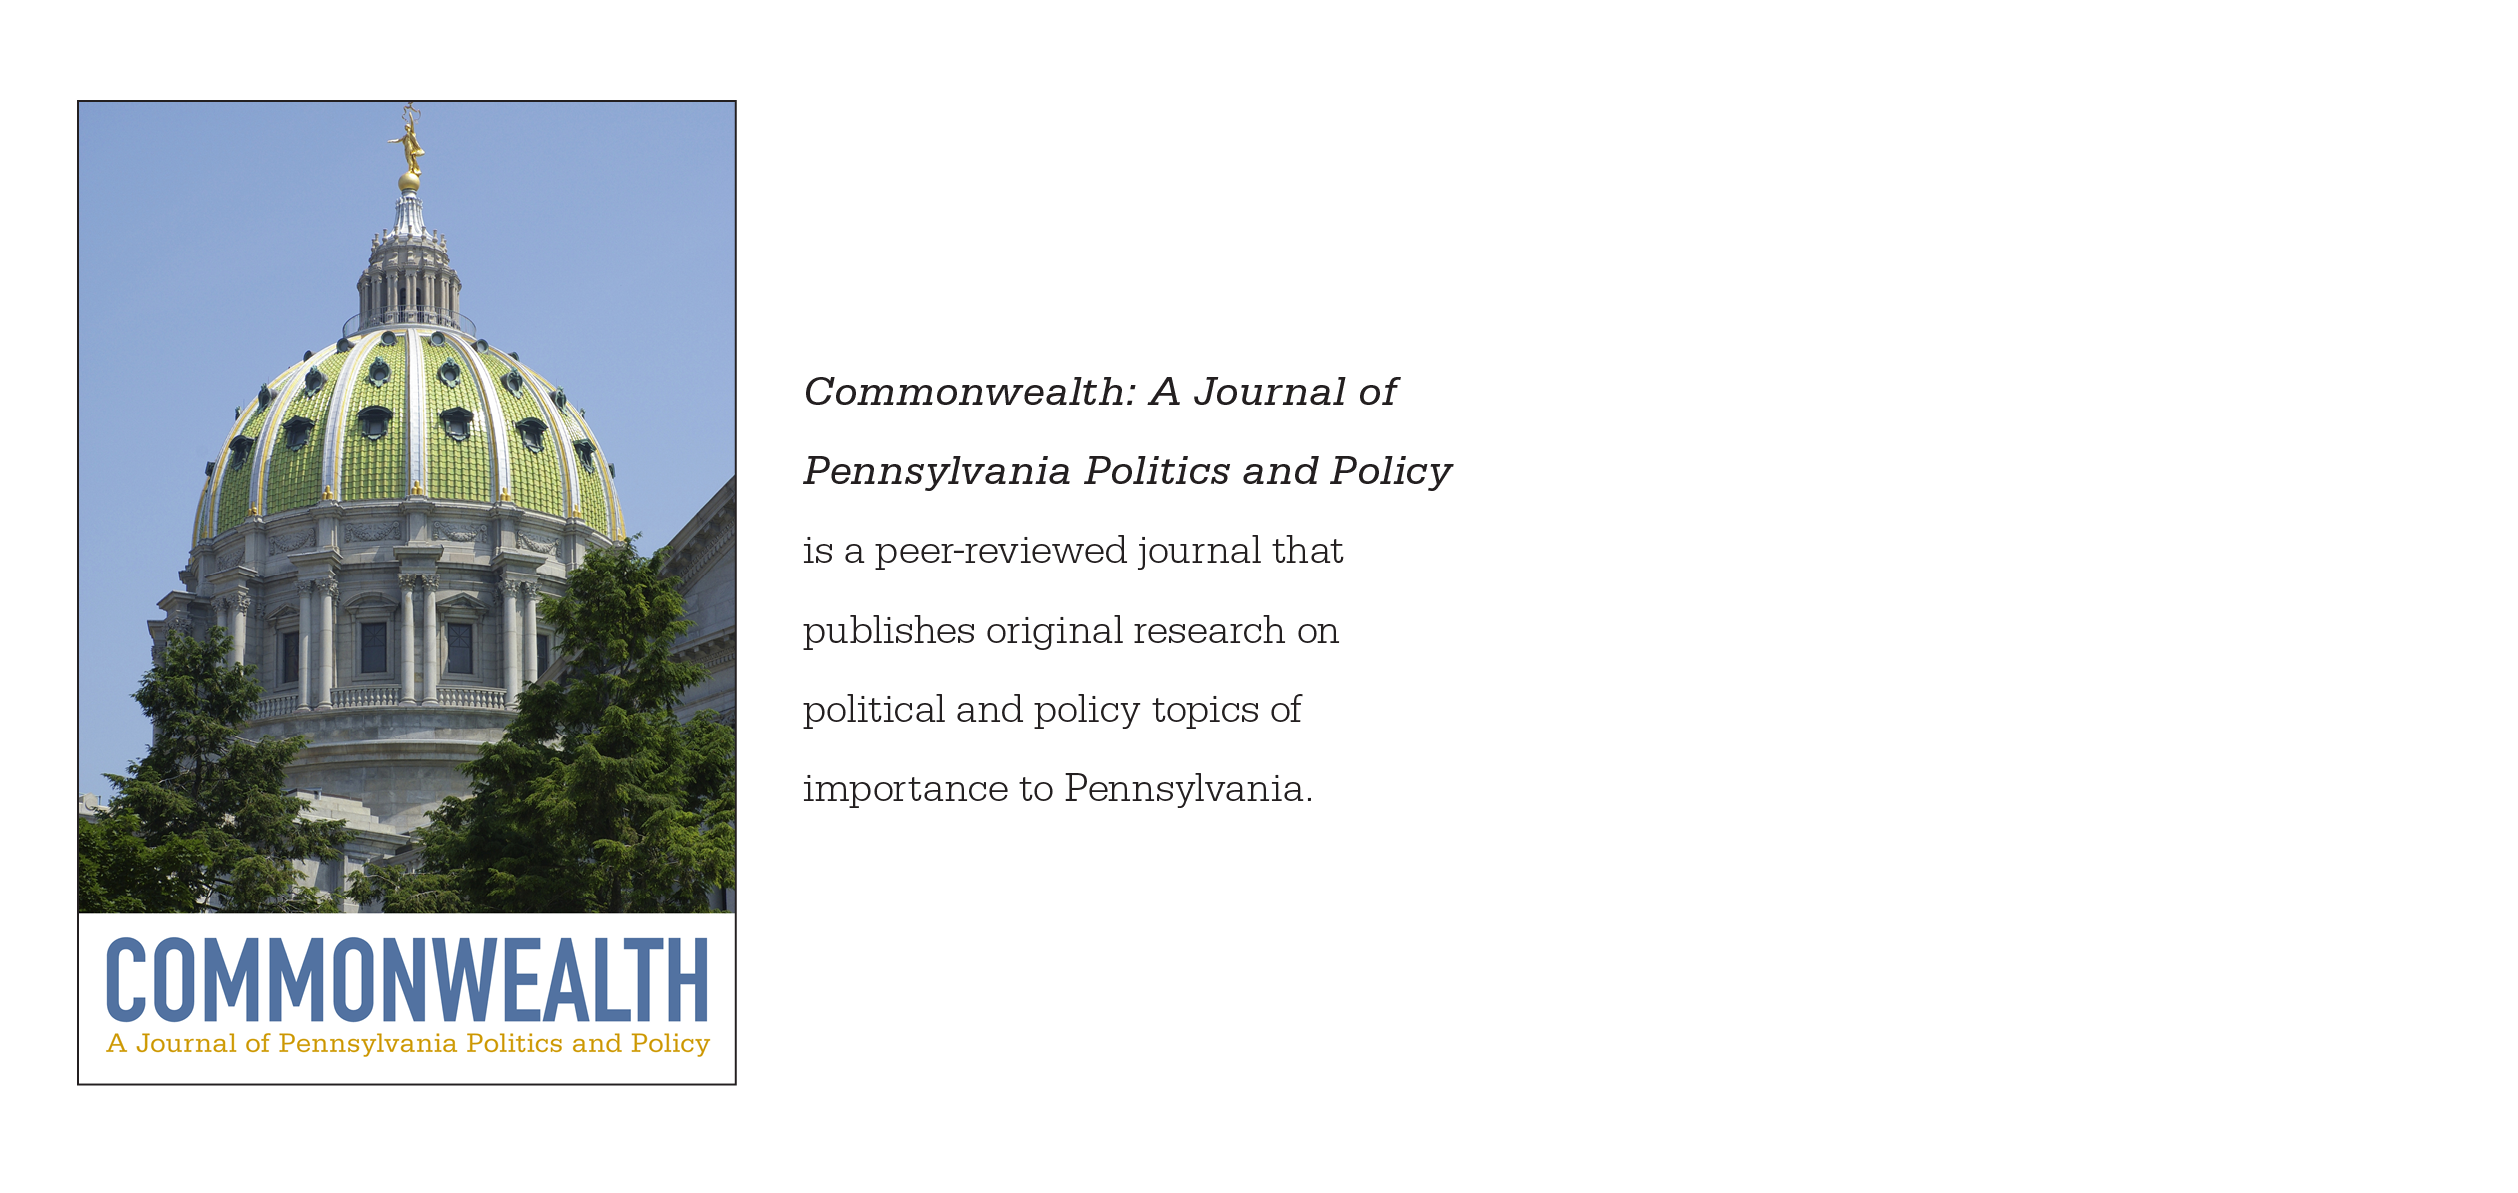 Commonwealth: A Journal of Pennsylvania Politics and Policy